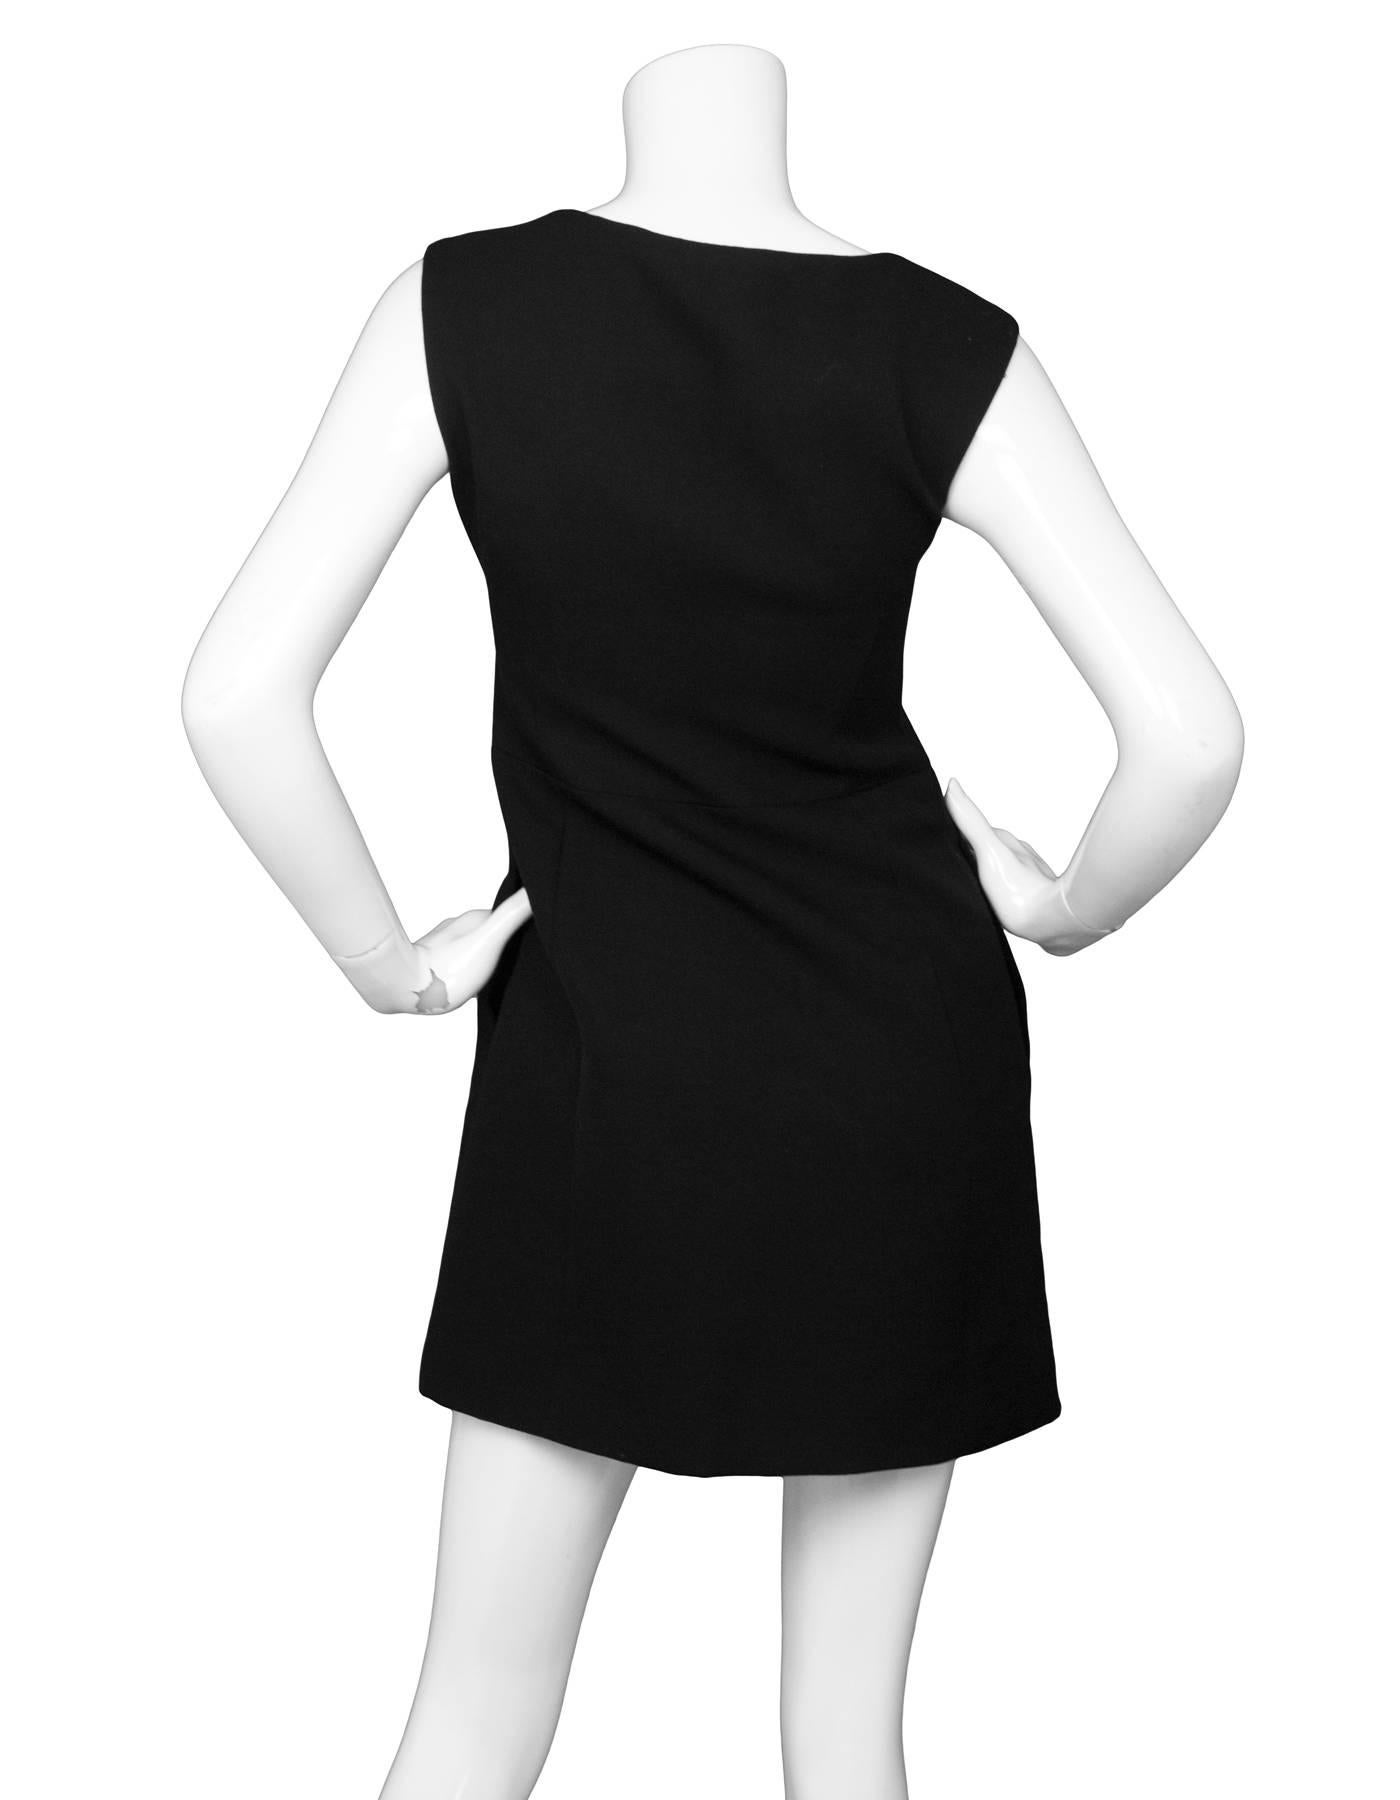 Prada Black Wool Sleeveless A-Line Dress 

Made In: Italy
Color: Black
Composition: 100% wool
Lining: Black, 100% cupro
Closure/Opening: Zip up side closure
Exterior Pockets: Two hip pockets
Interior Pockets: None
Overall Condition: Excellent